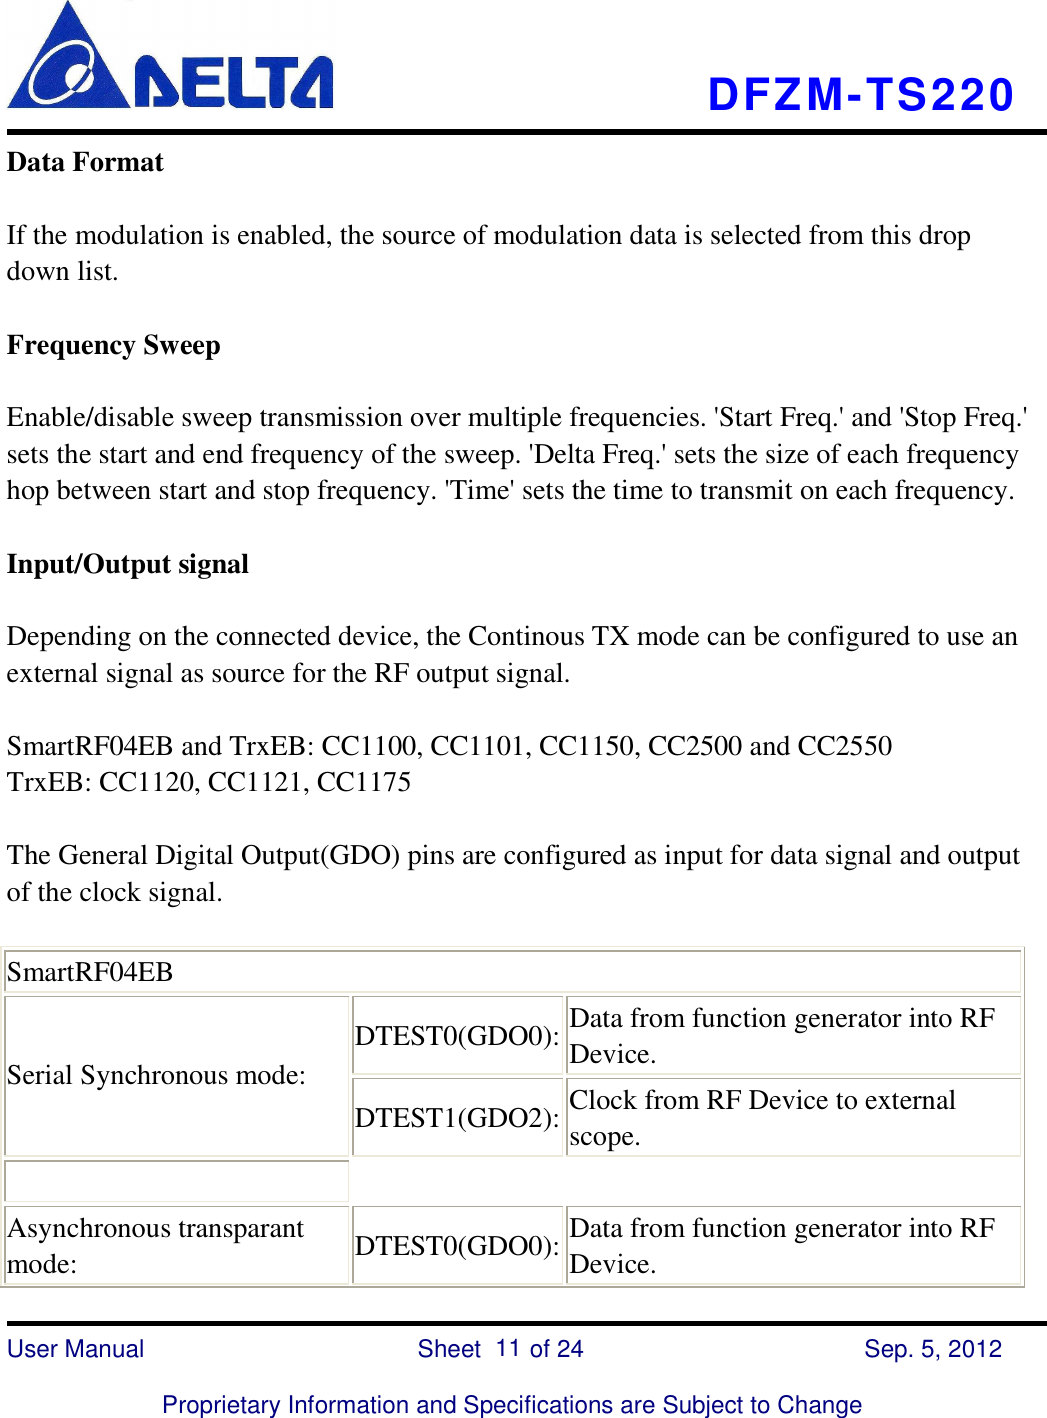    DFZM-TS220    User Manual                            Sheet        of 24      Sep. 5, 2012  Proprietary Information and Specifications are Subject to Change 11 Data Format  If the modulation is enabled, the source of modulation data is selected from this drop down list.  Frequency Sweep  Enable/disable sweep transmission over multiple frequencies. &apos;Start Freq.&apos; and &apos;Stop Freq.&apos; sets the start and end frequency of the sweep. &apos;Delta Freq.&apos; sets the size of each frequency hop between start and stop frequency. &apos;Time&apos; sets the time to transmit on each frequency.  Input/Output signal  Depending on the connected device, the Continous TX mode can be configured to use an external signal as source for the RF output signal.  SmartRF04EB and TrxEB: CC1100, CC1101, CC1150, CC2500 and CC2550 TrxEB: CC1120, CC1121, CC1175  The General Digital Output(GDO) pins are configured as input for data signal and output of the clock signal.  SmartRF04EB DTEST0(GDO0): Data from function generator into RF Device. Serial Synchronous mode: DTEST1(GDO2): Clock from RF Device to external scope.      Asynchronous transparant mode:  DTEST0(GDO0): Data from function generator into RF Device. 